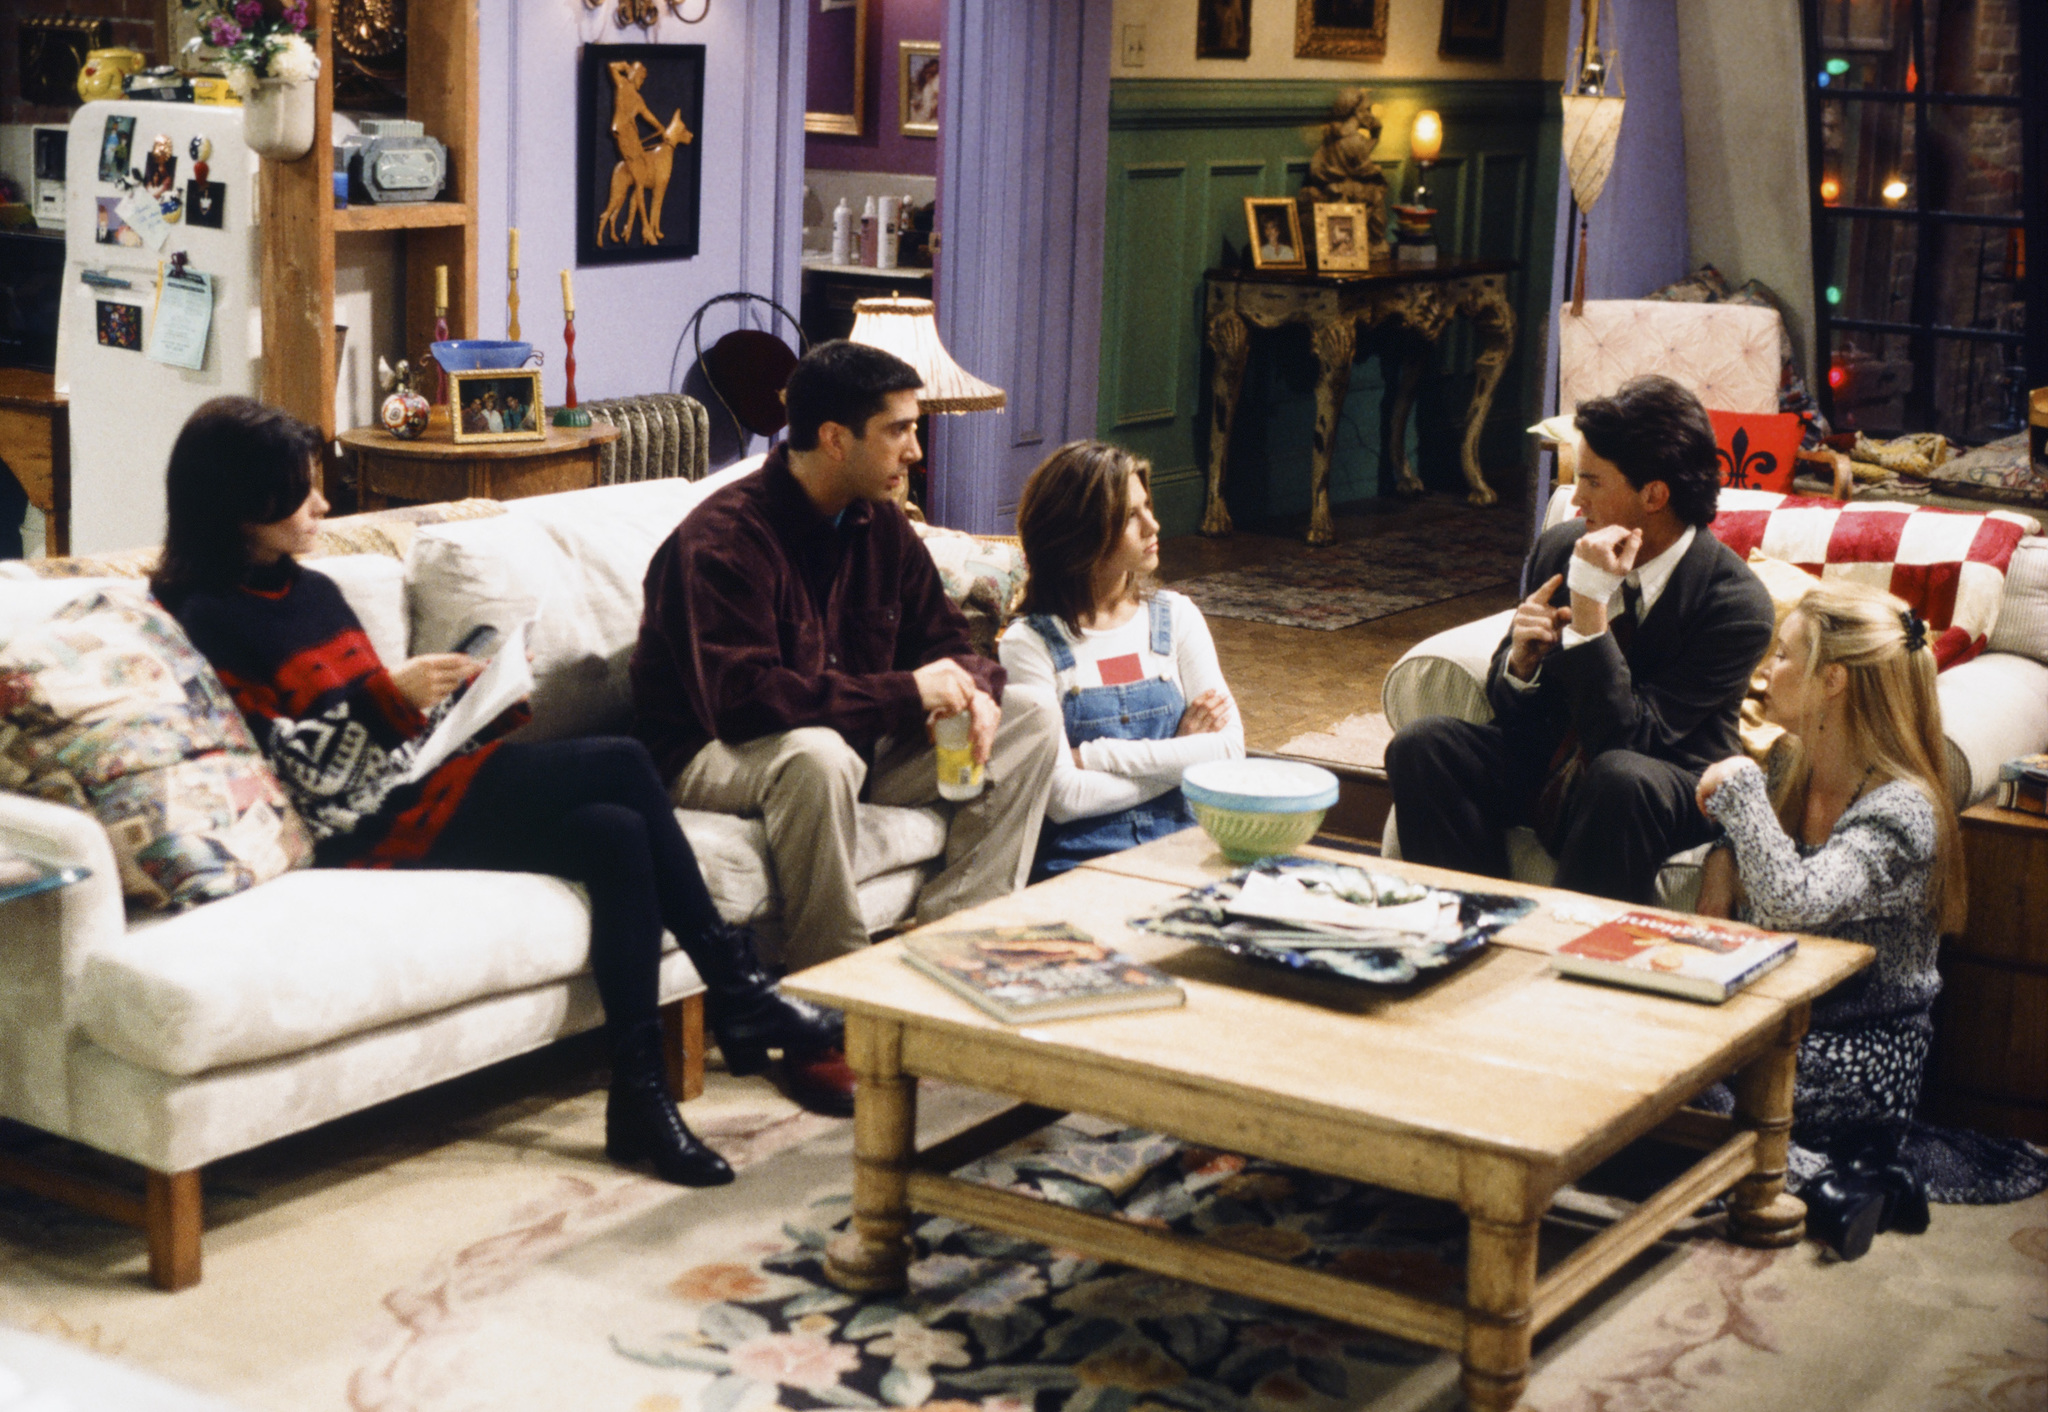 Spend a Night at the FRIENDS Apartment for Just $20 - Nerdist